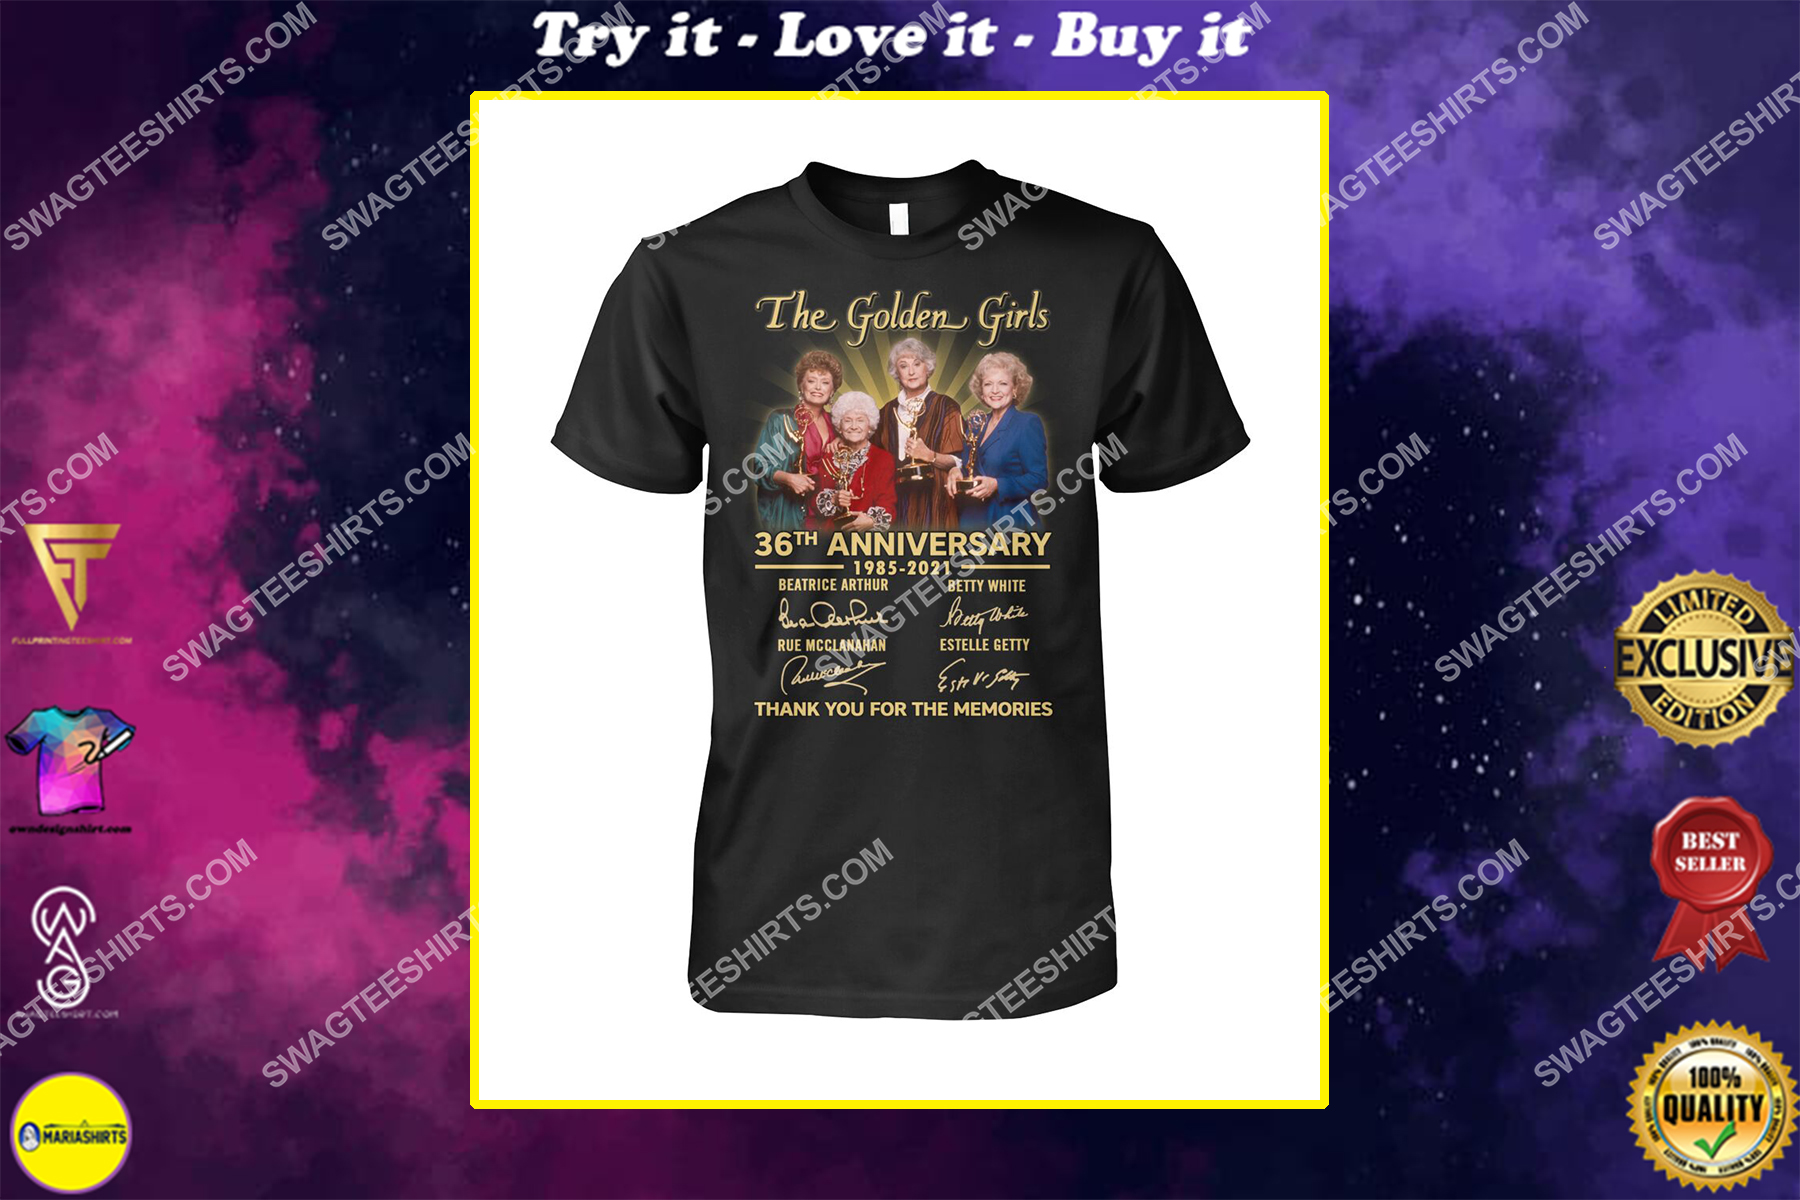 the golden girl 36th anniversary 1985 2021 thank you for the memories signatures shirt